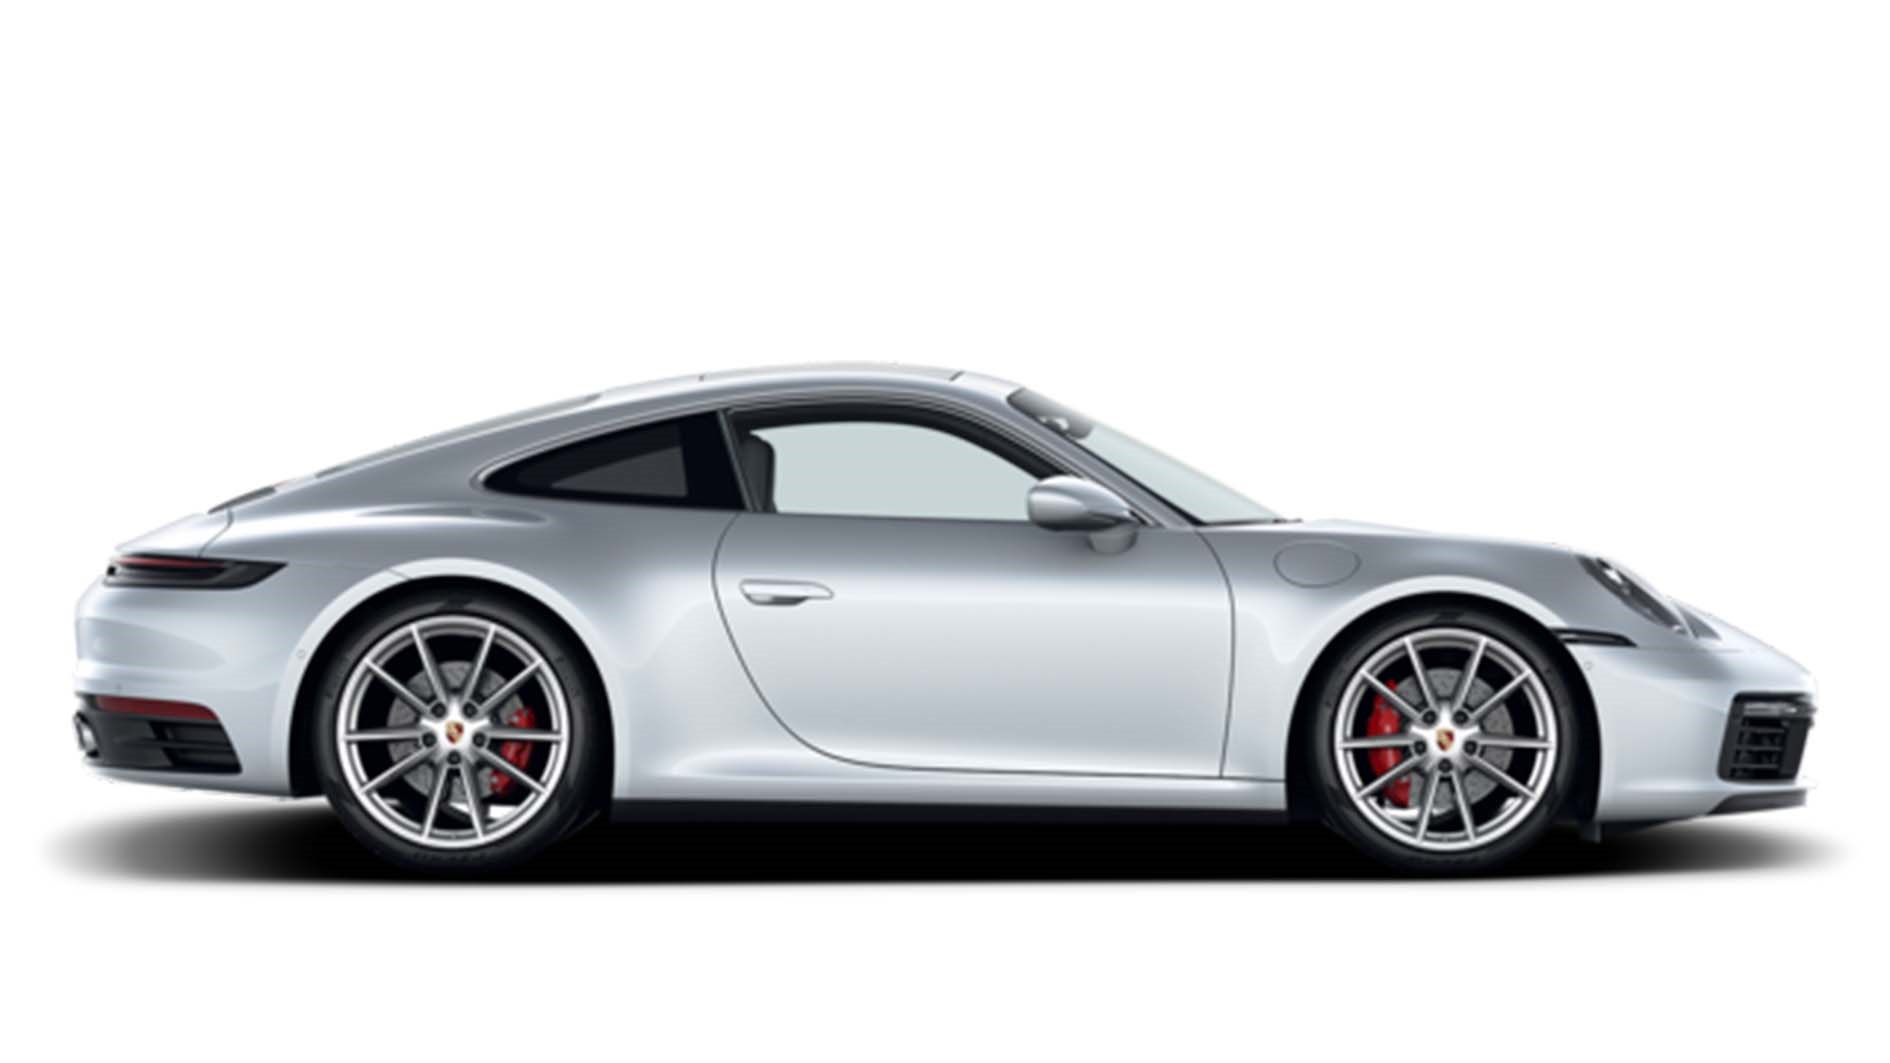 New Porsche 911 coming soon: hybrid version also on the way